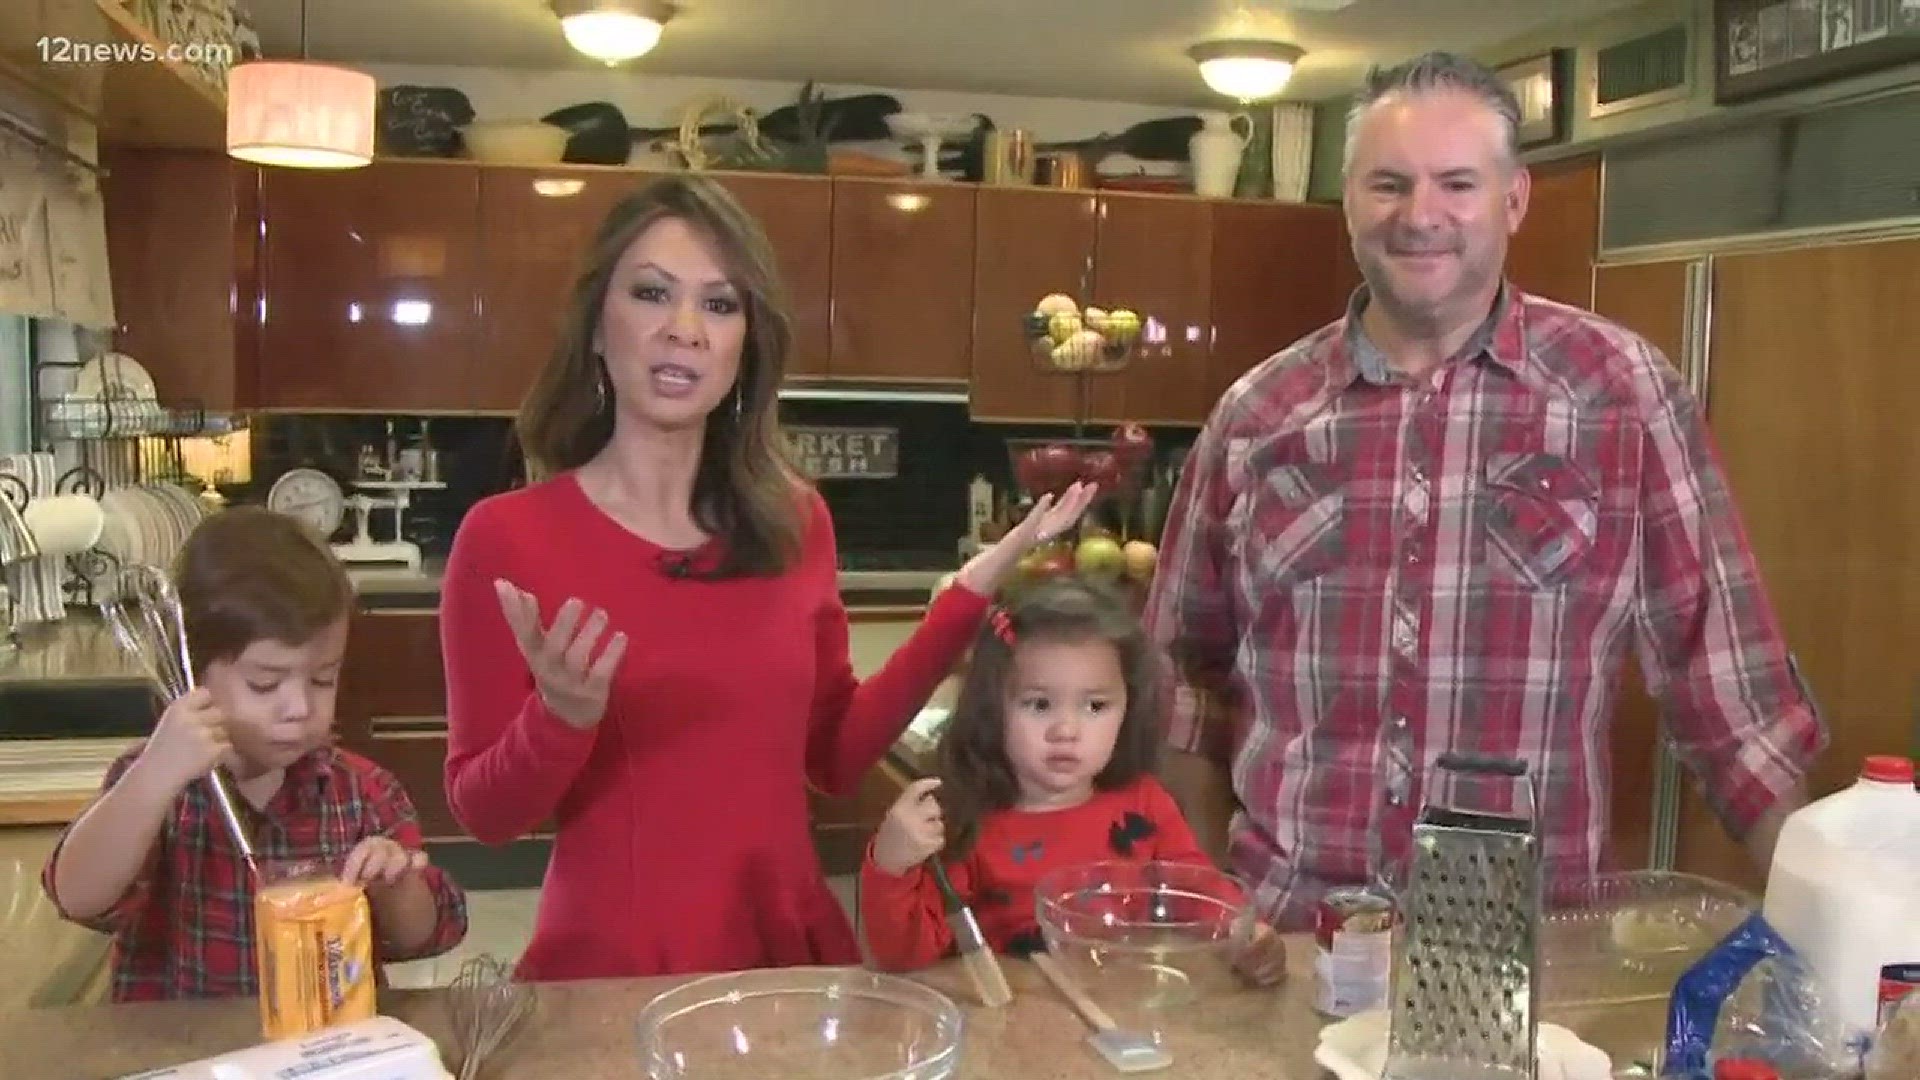 Tram Mai and her family show us how to make a delicious Christmas casserole.